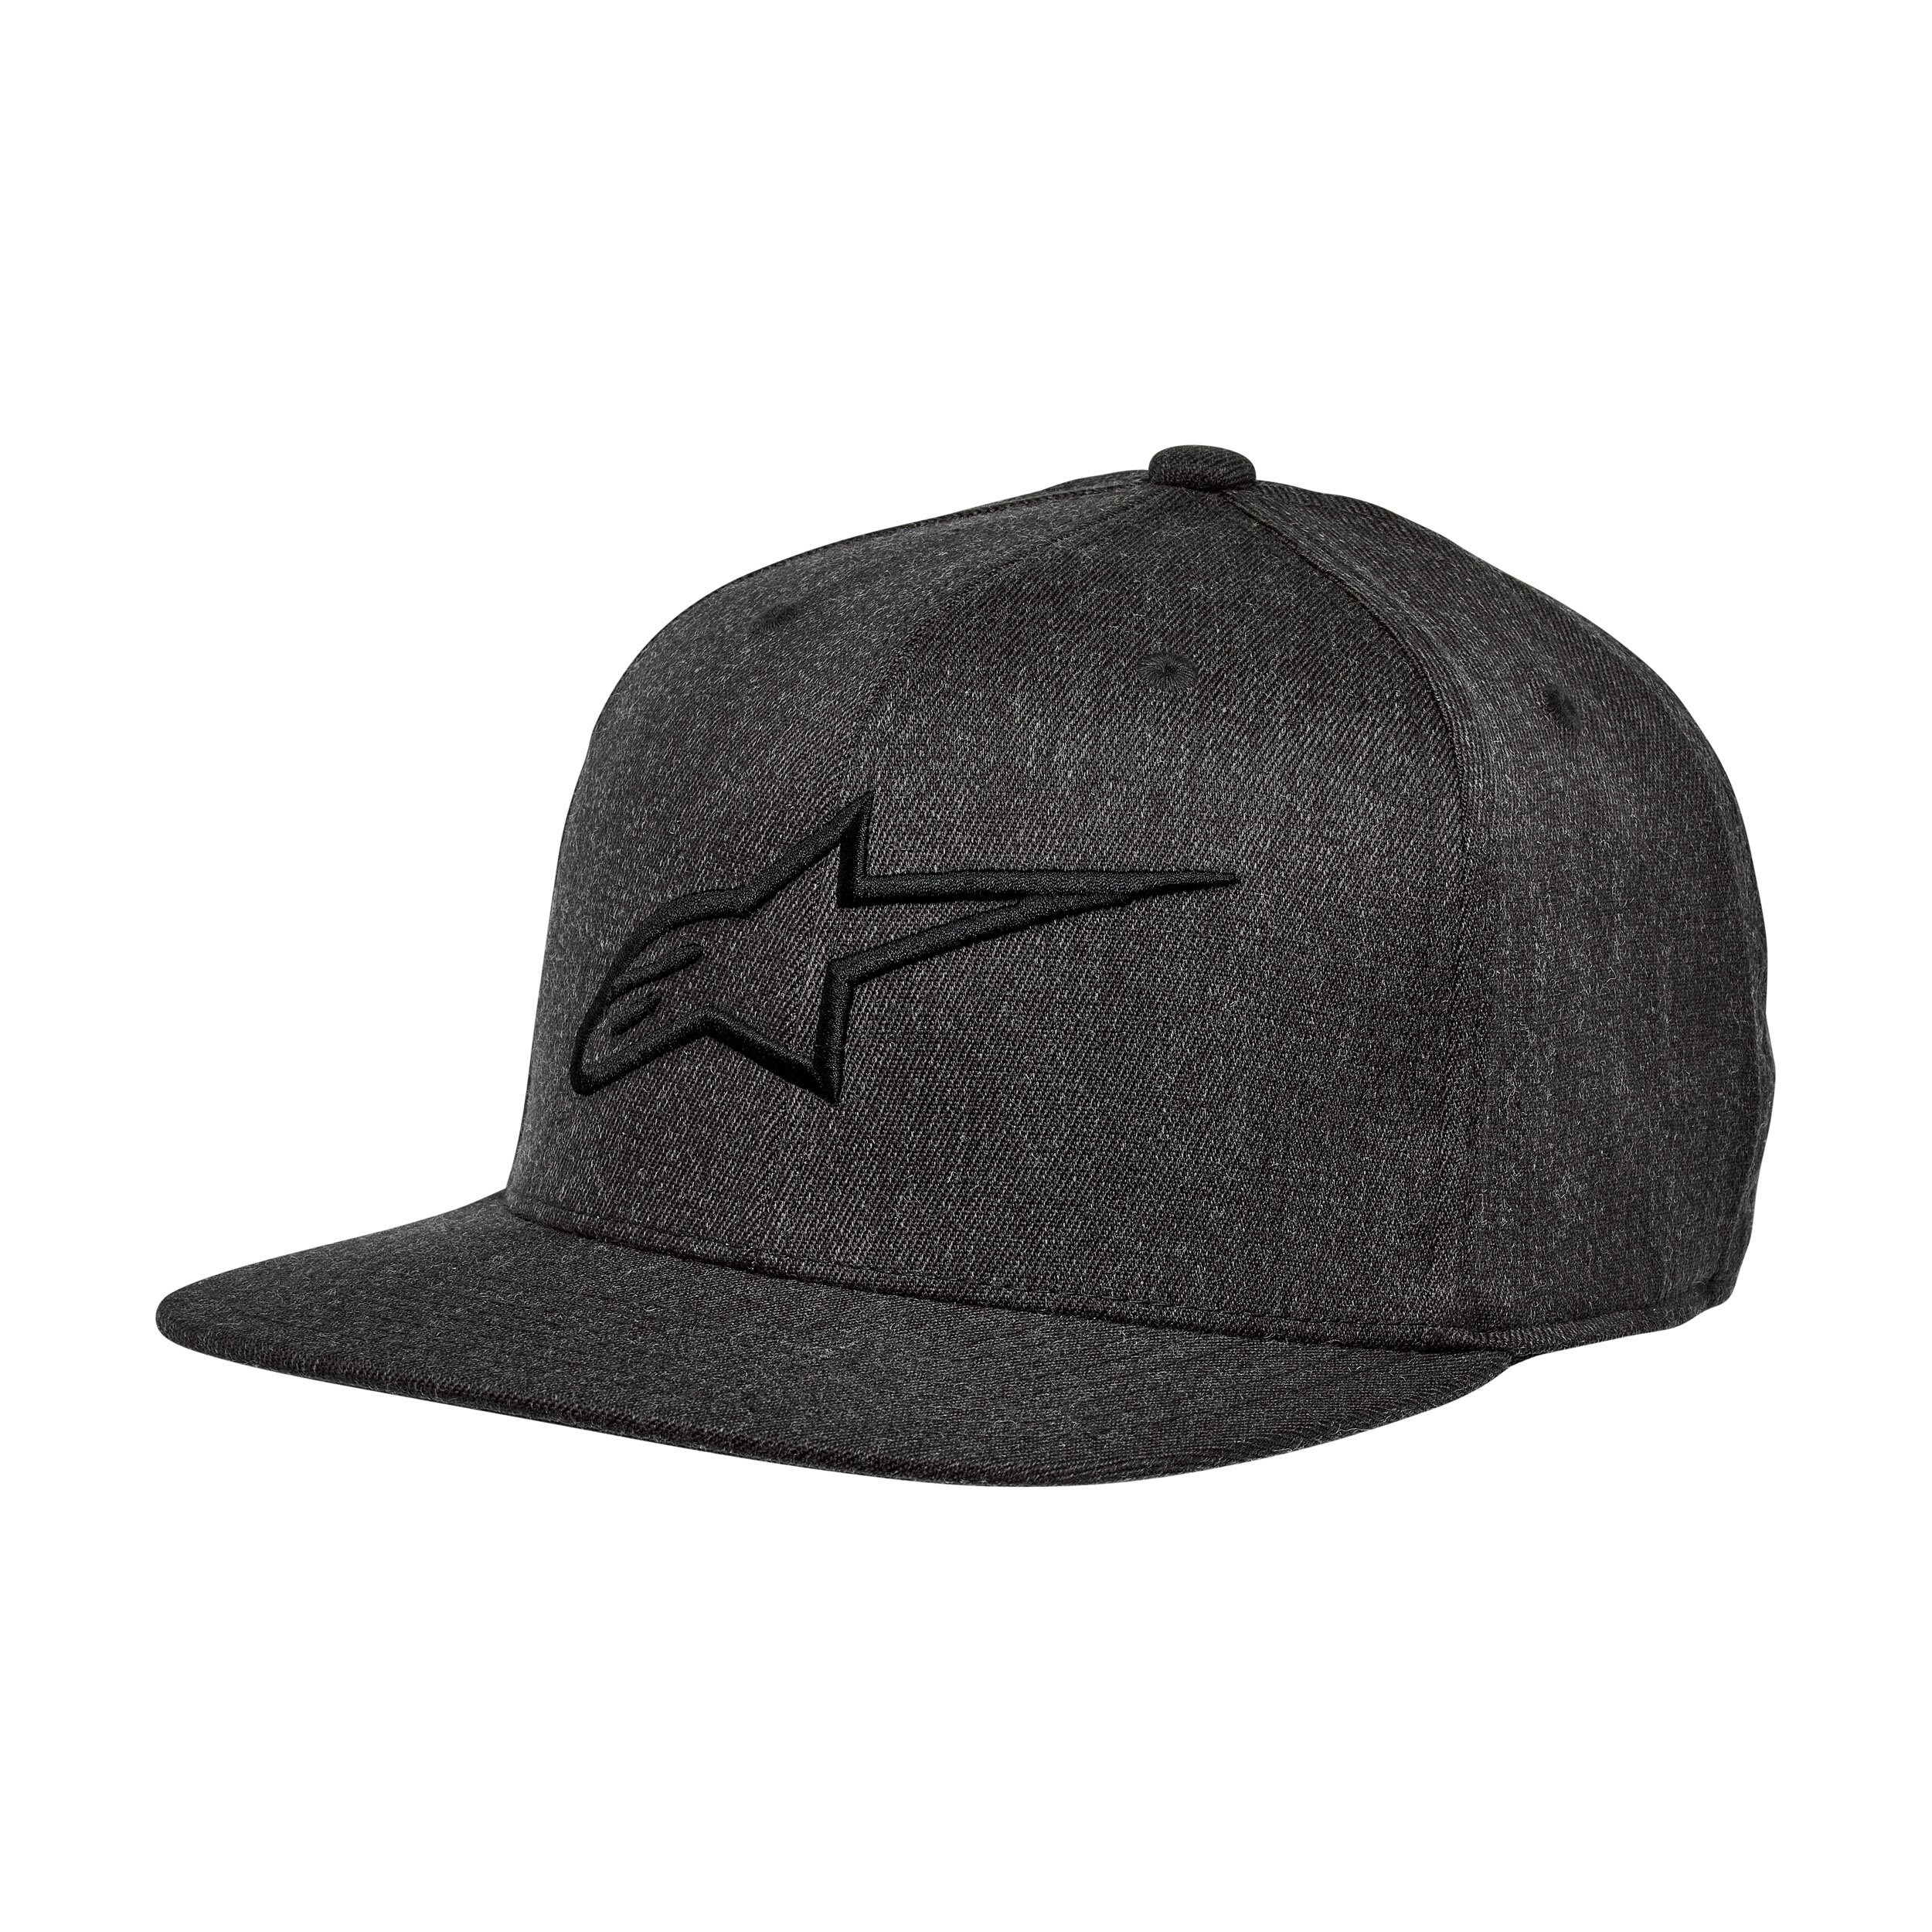 Keps Ageless Flat Hat Charcoal